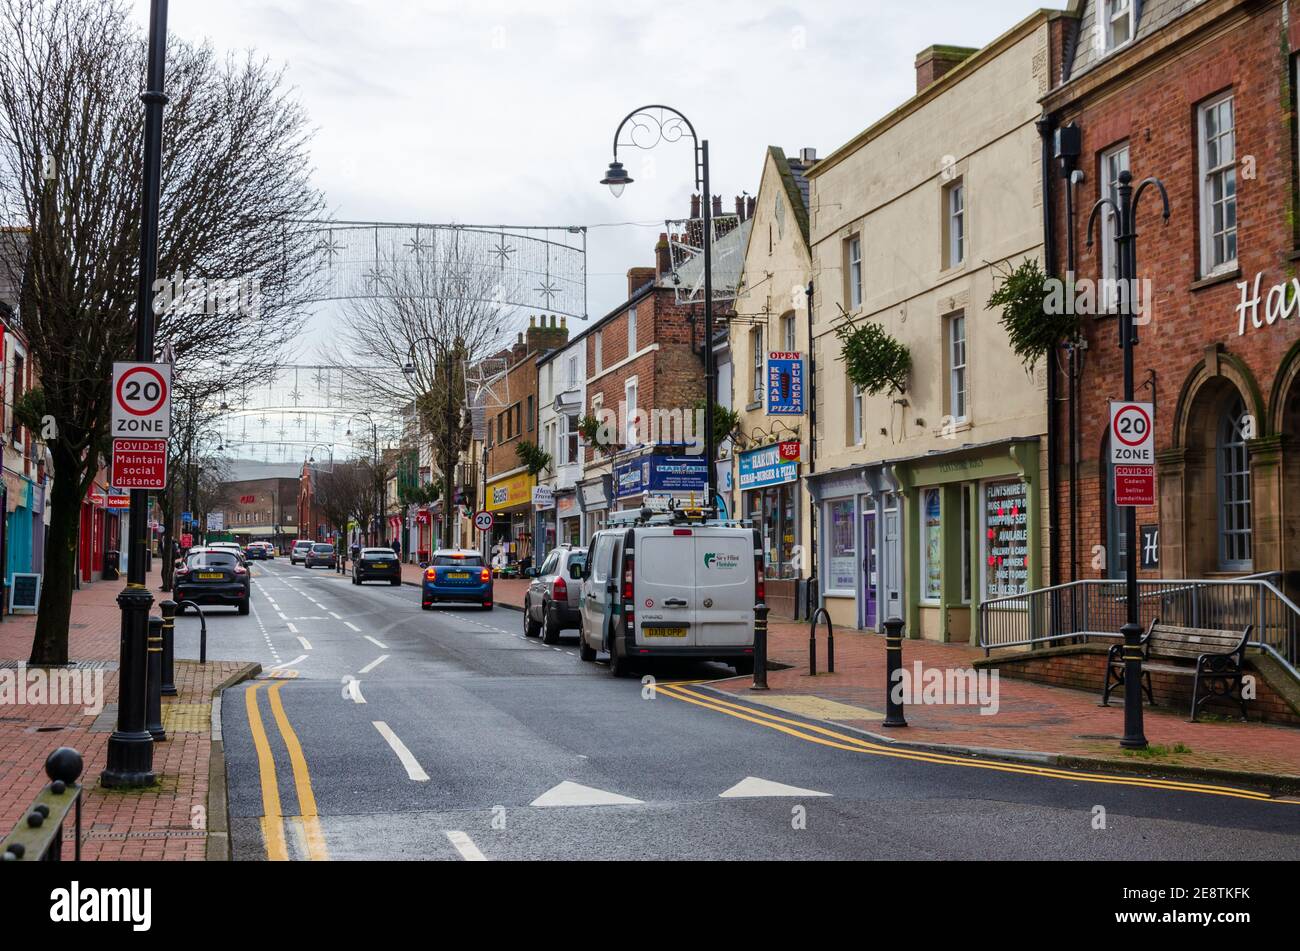 Flint; UK: Jan 28, 2021: The High Street is very quiet on a Thursday afternoon as non-essential shops and businesses remain closed during the pandemic Stock Photo